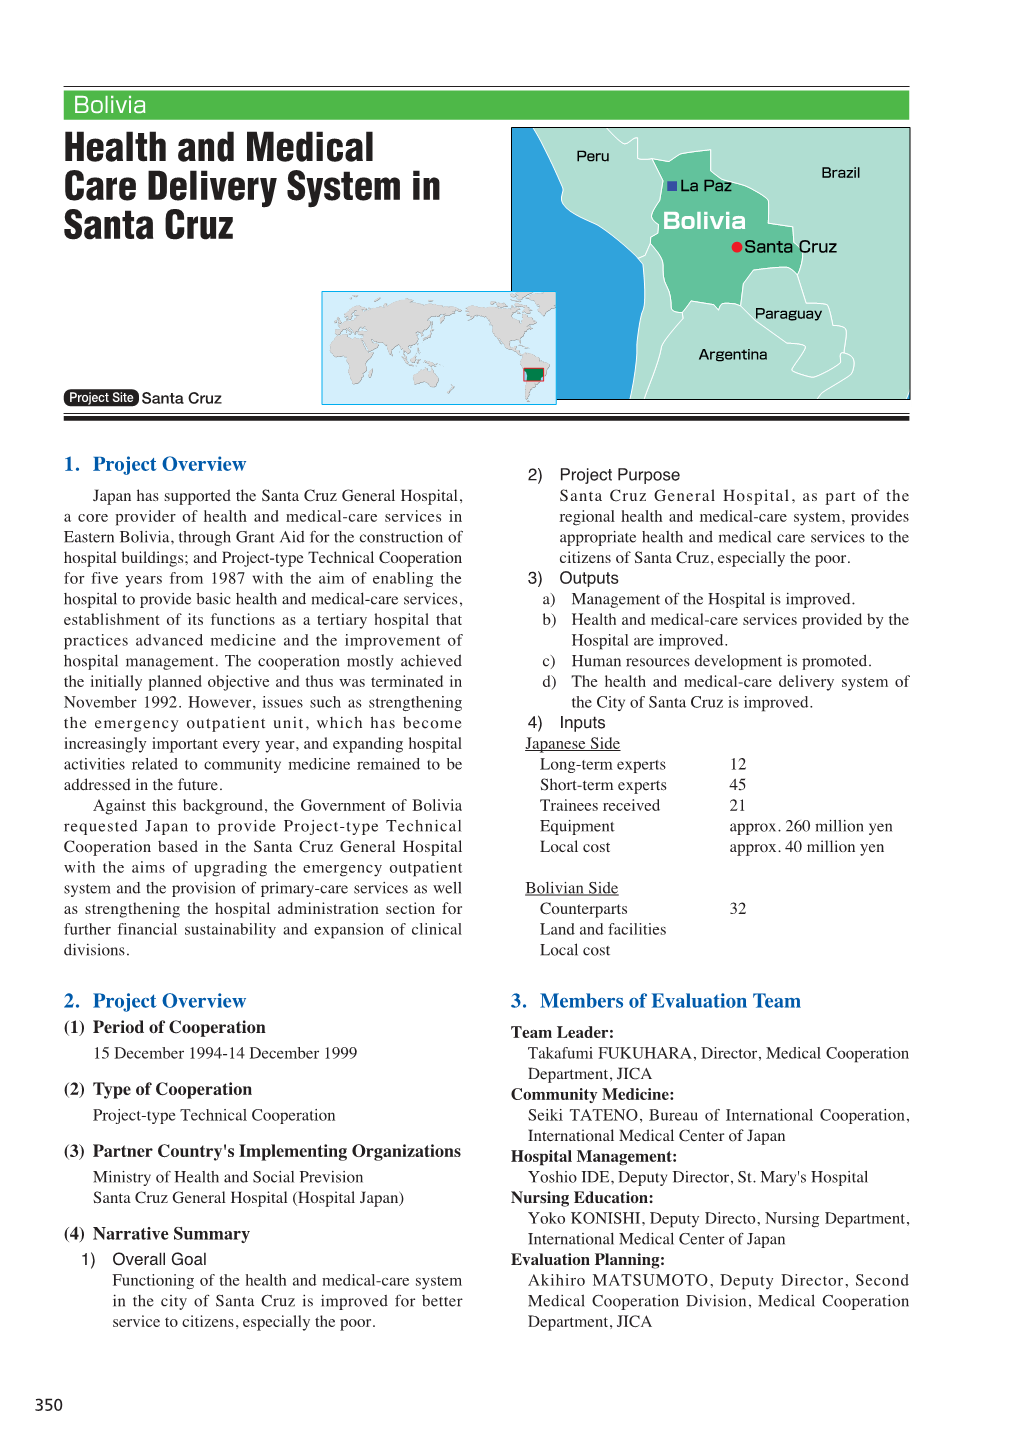 Health and Medical Care Delivery System in Santa Cruz